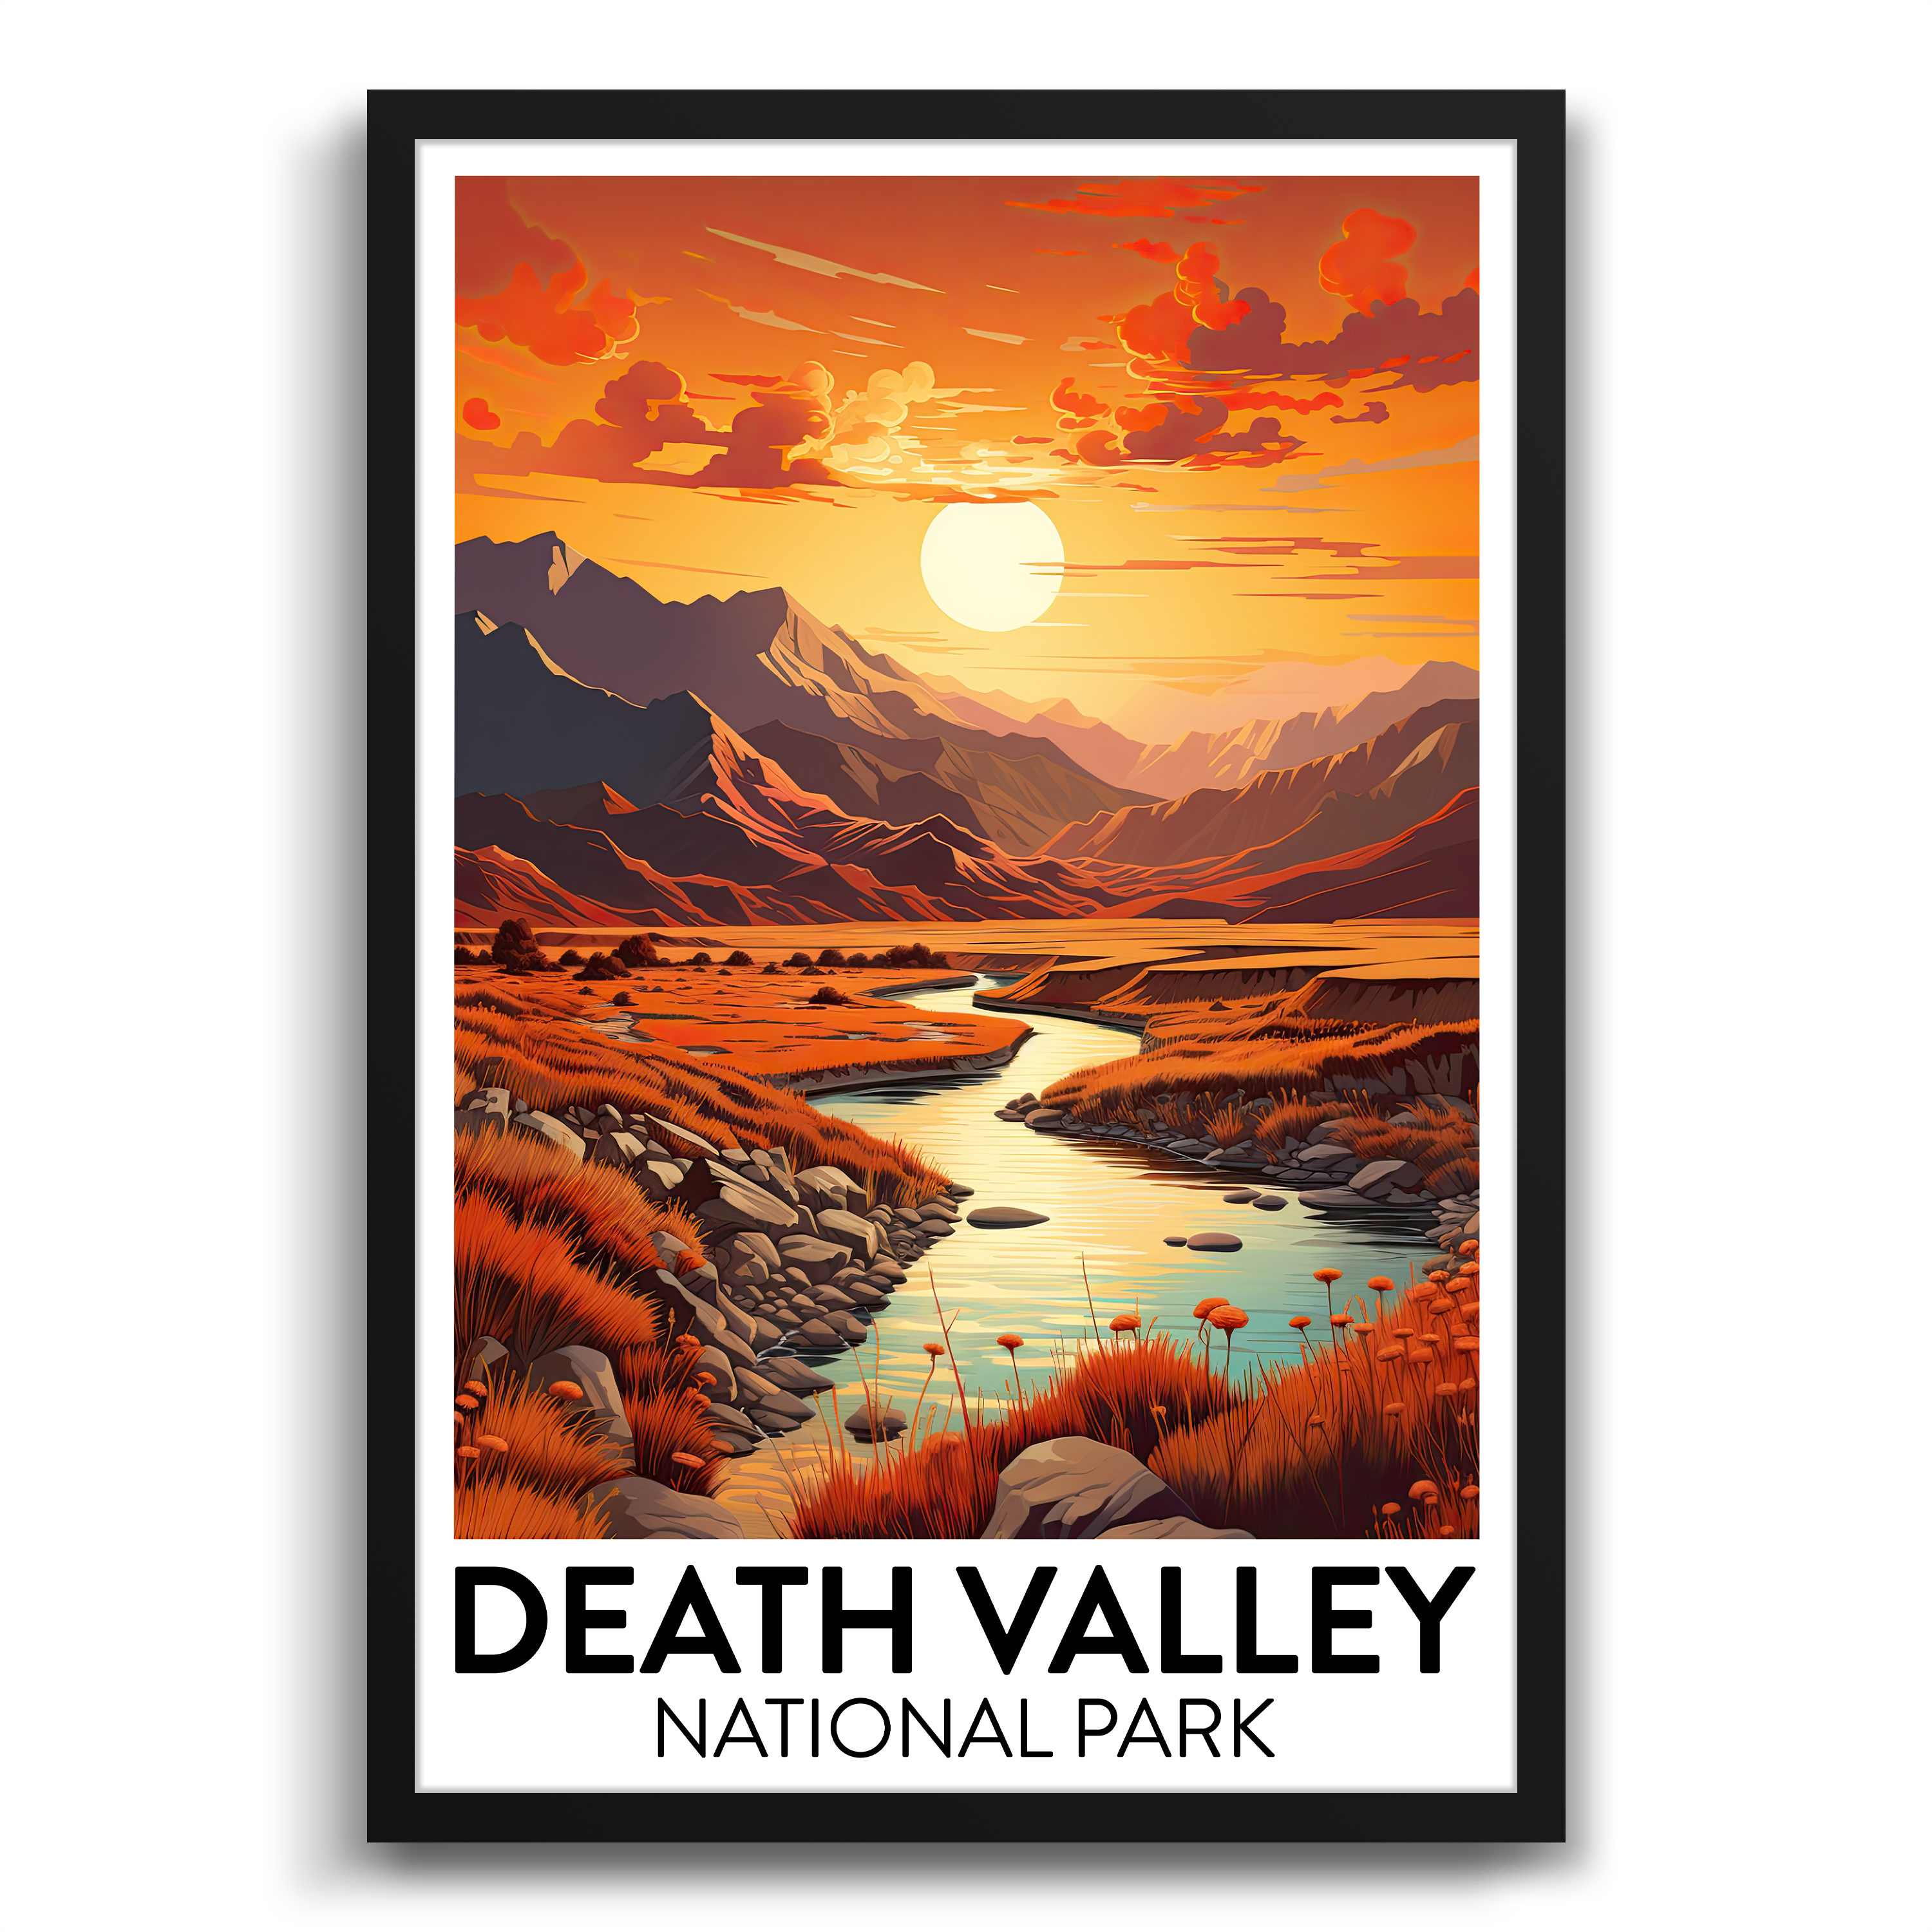 Death valley national park poster